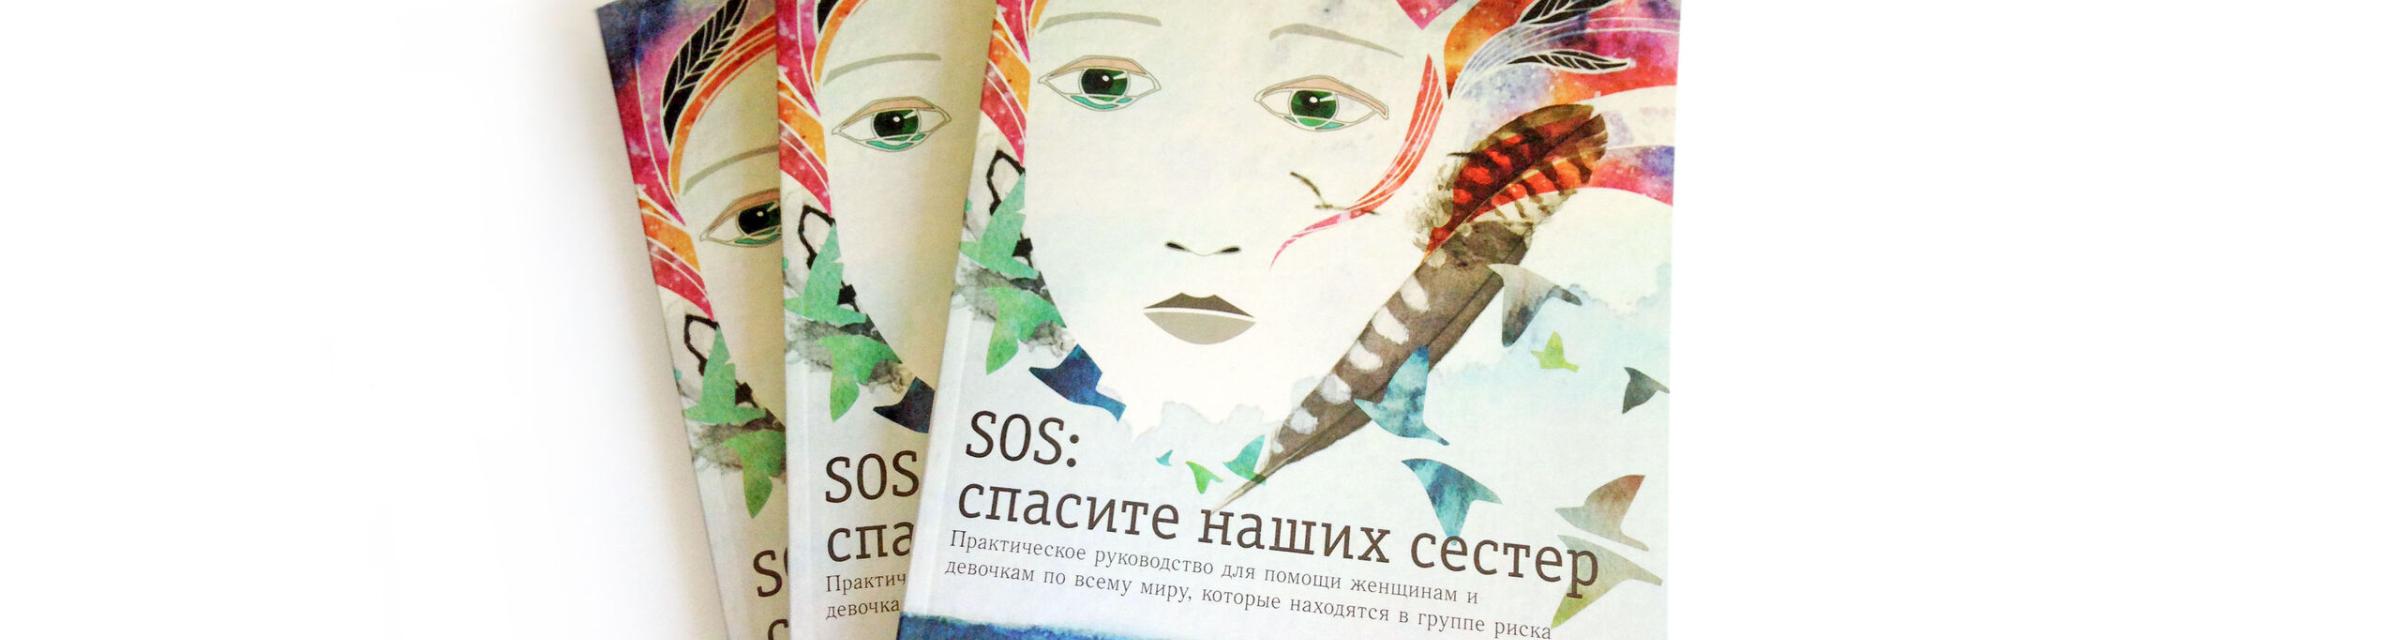 "Save our Sisters" books in Russian